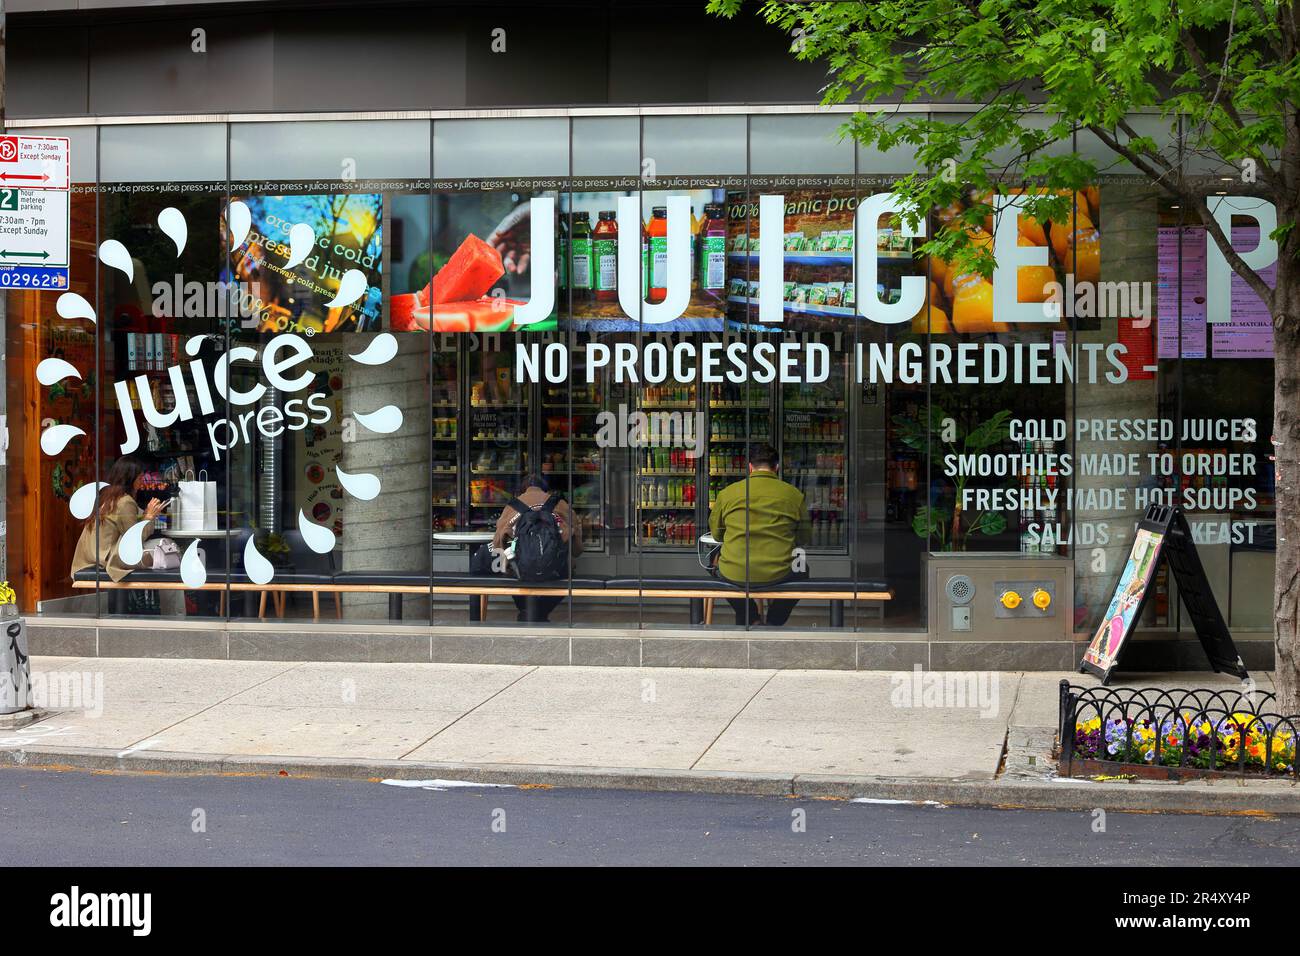 Juice Press, 122 Greenwich Ave, New York, NYC storefront photo of a fresh juicery in Manhattan's Greenwich Village neighborhood. Stock Photo